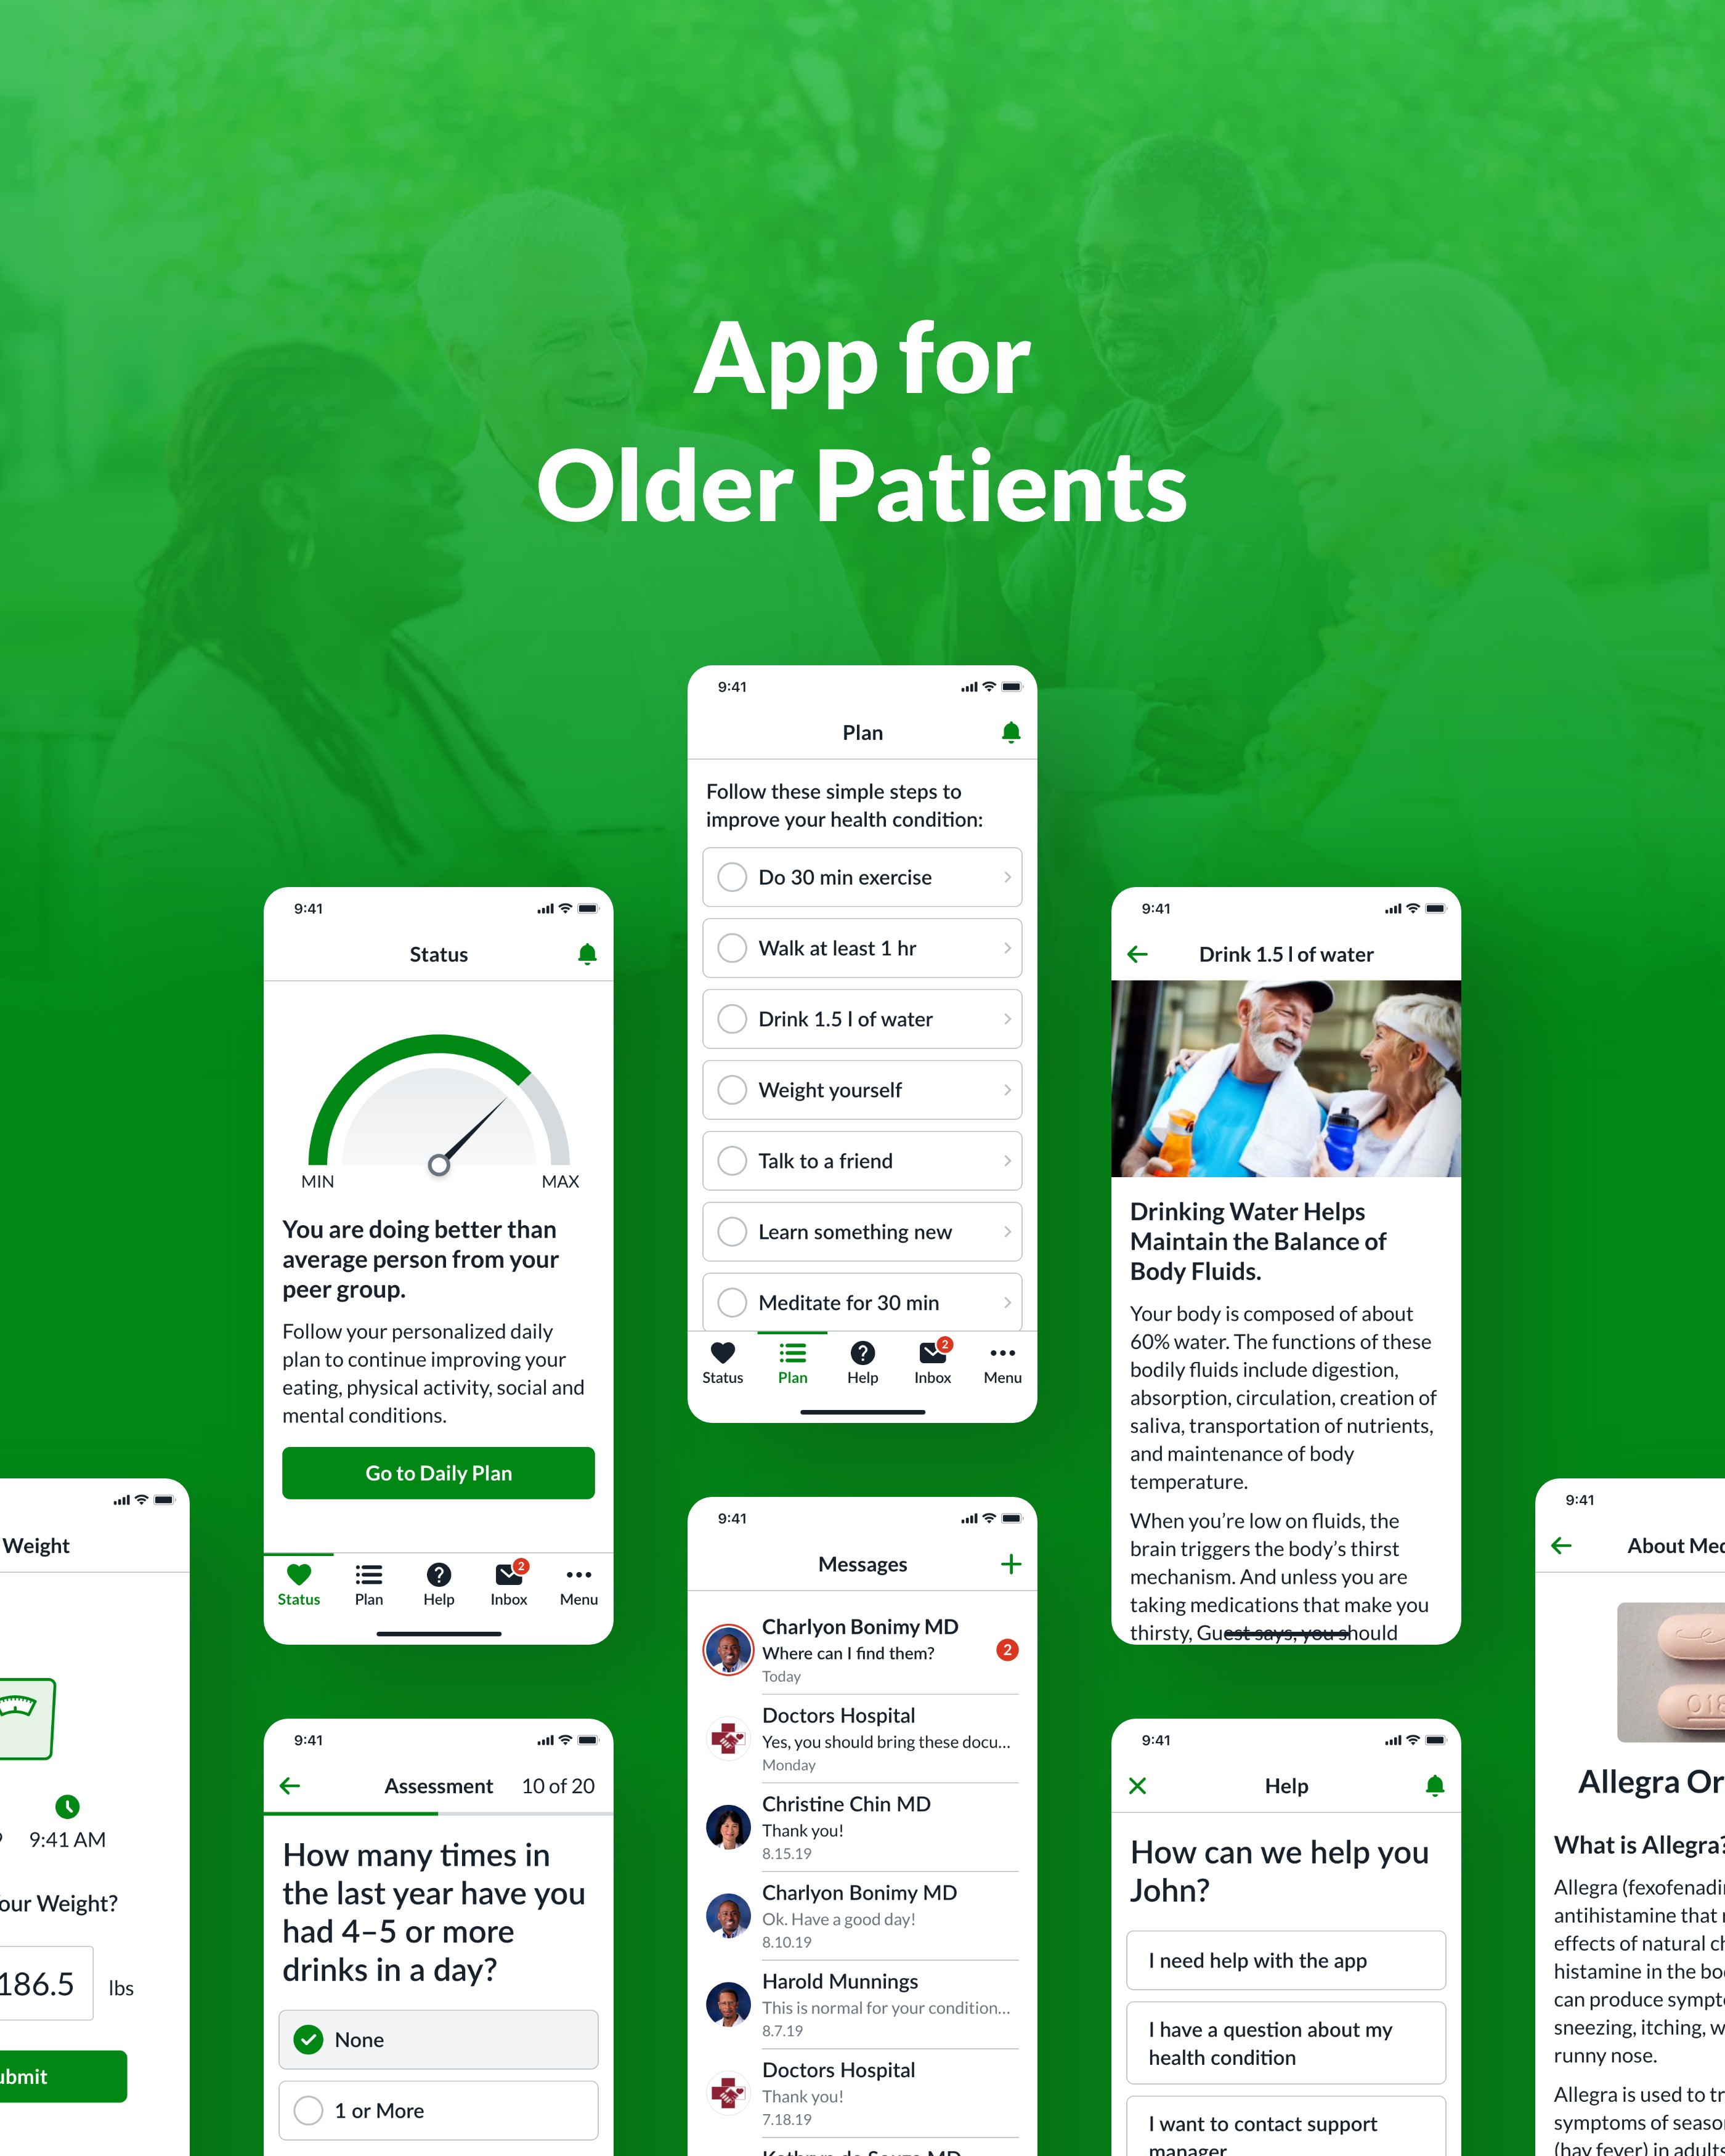 Patient Health Monitoring Platform – UI/UX Design for Mobile and Web Apps